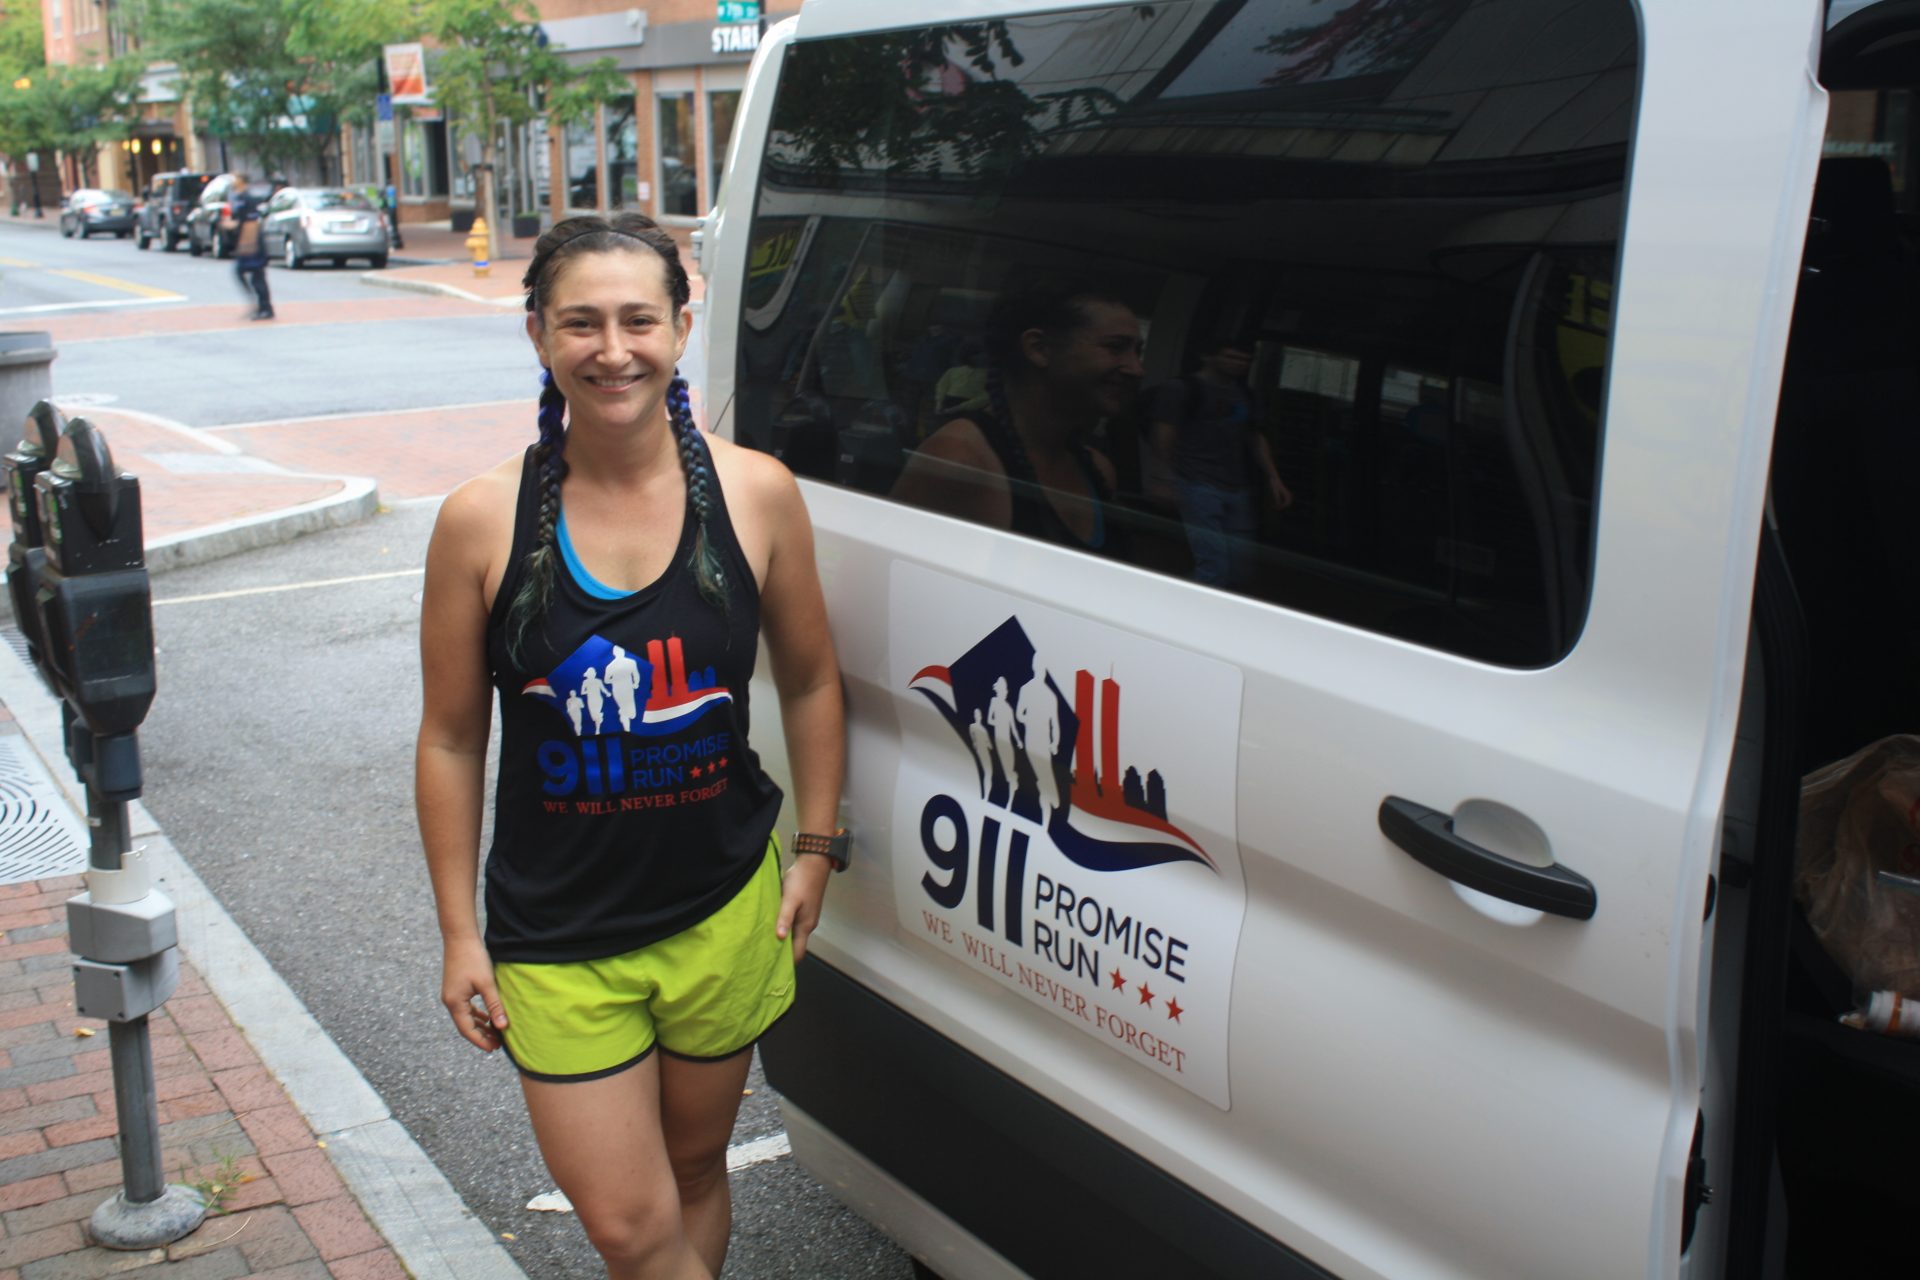 Dani Sevel of Virginia takes a break from the 9/11 Promise Run in downtown Wilmington Tuesday morning. Sevel and her team will run 243 miles from the Pentagon to Ground Zero in New York City by Wednesday.